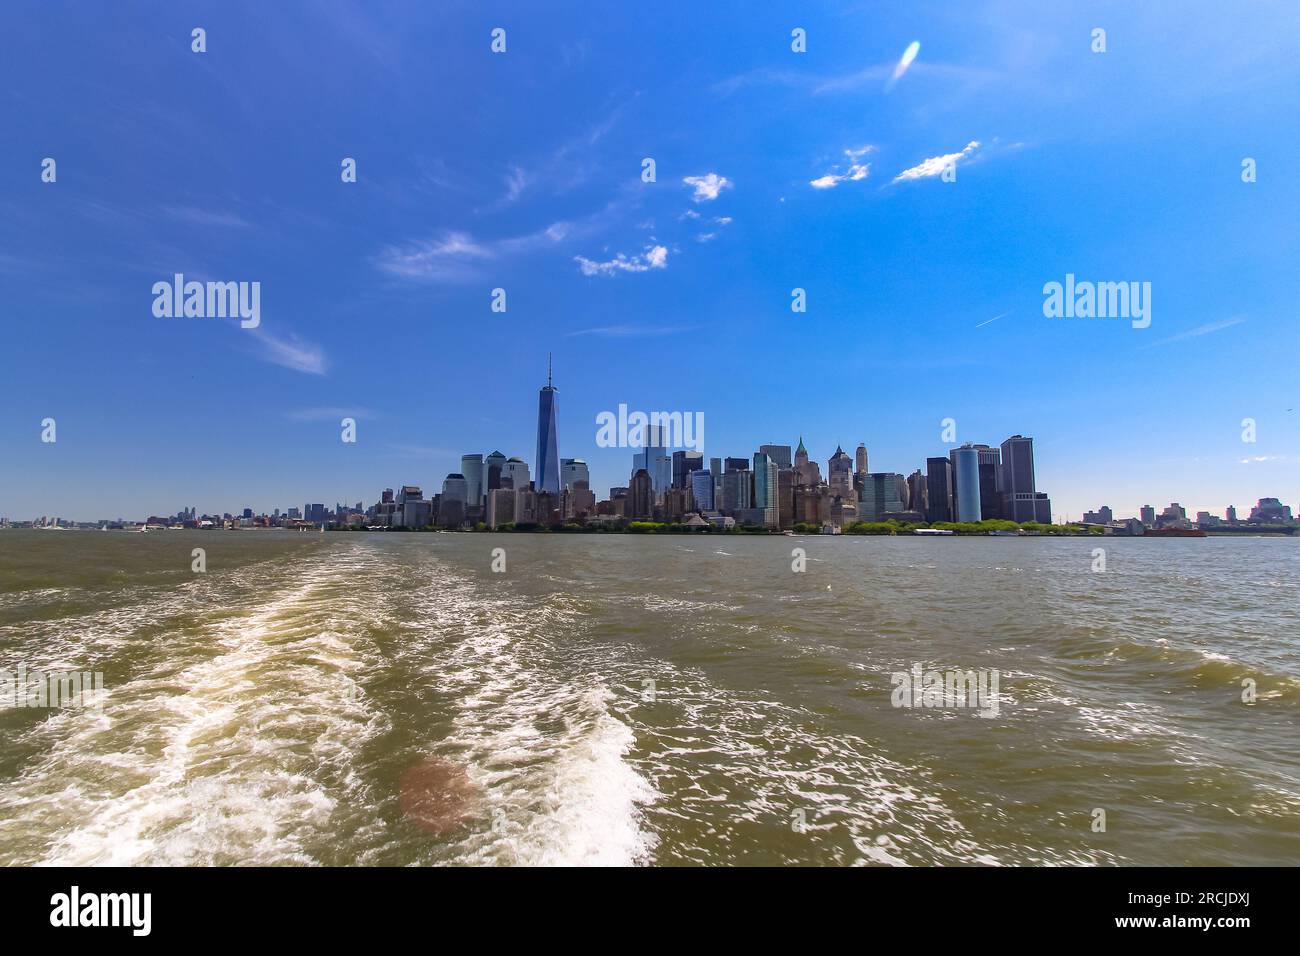 Scenic waterfront skyline with One World Trade Center seen from Upper New York Bay, Manhattan, New York City, USA Stock Photo